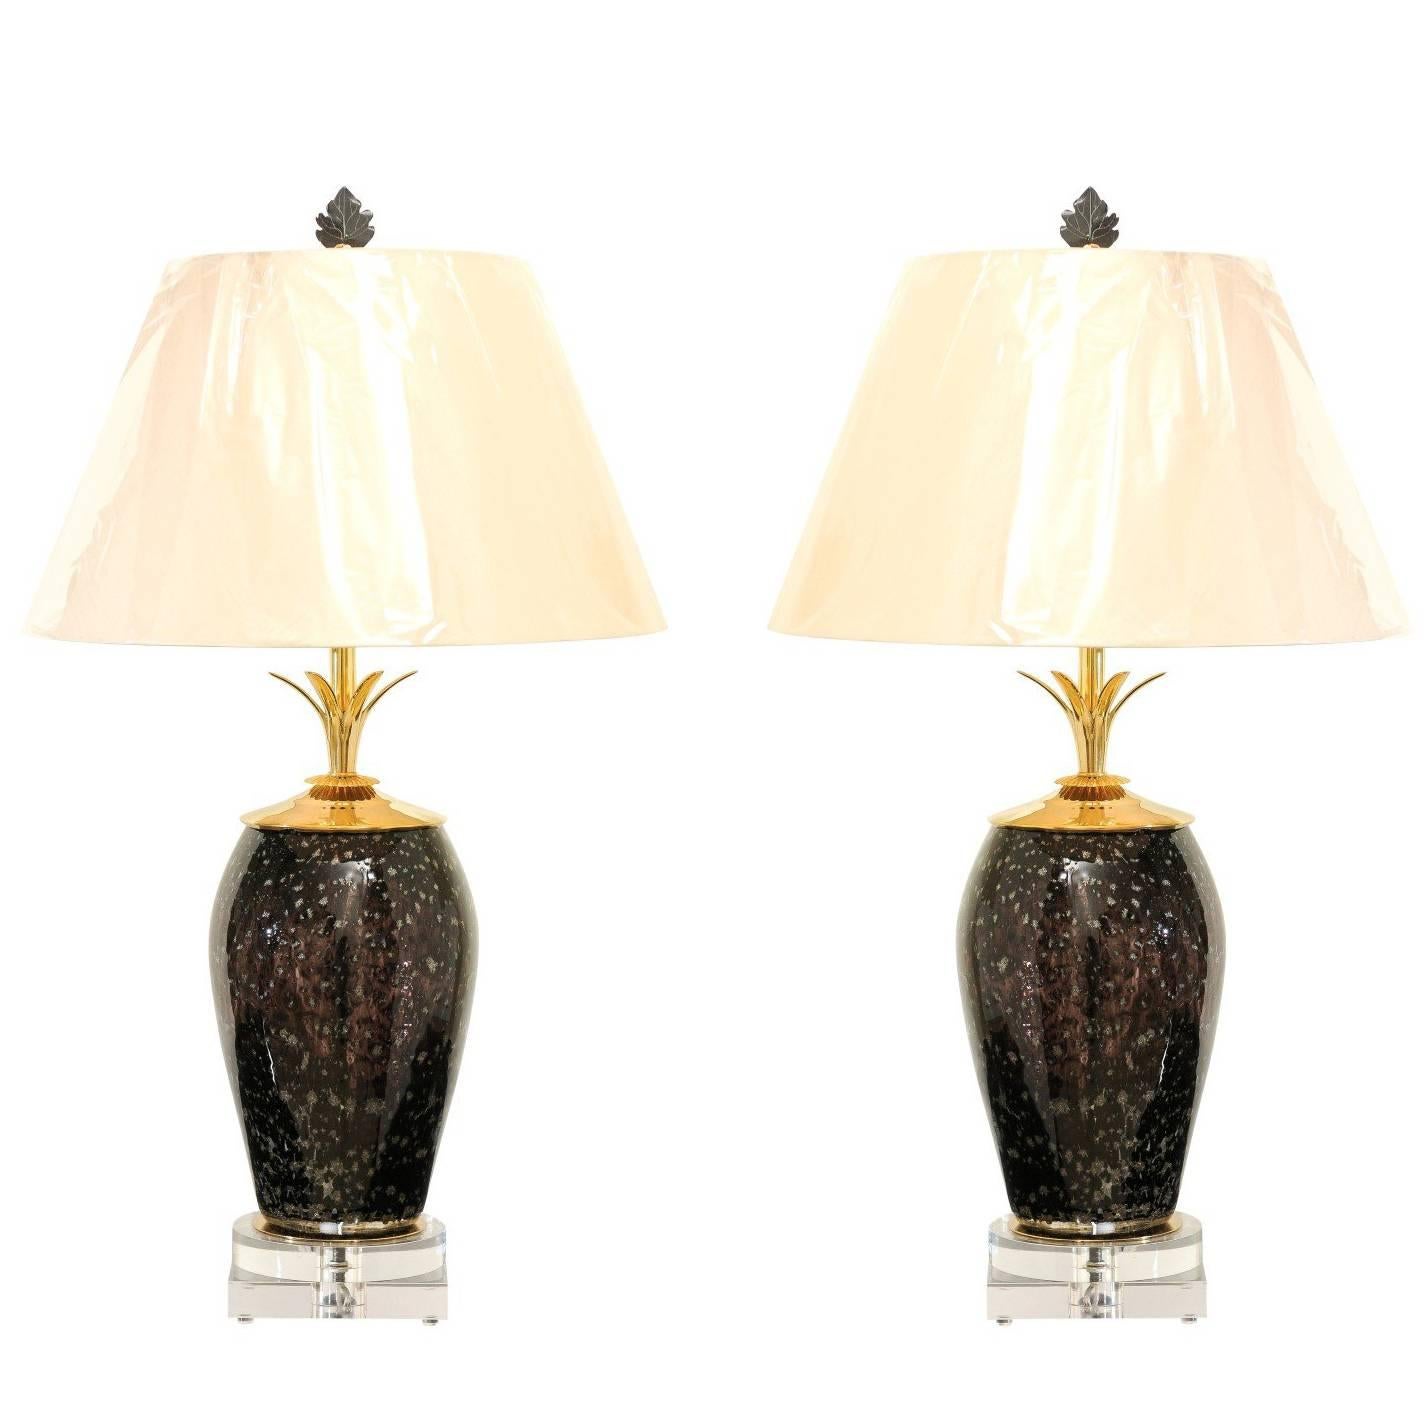 Exceptional Pair of Italian Granite Style Blown Glass Vases as Custom Lamps For Sale